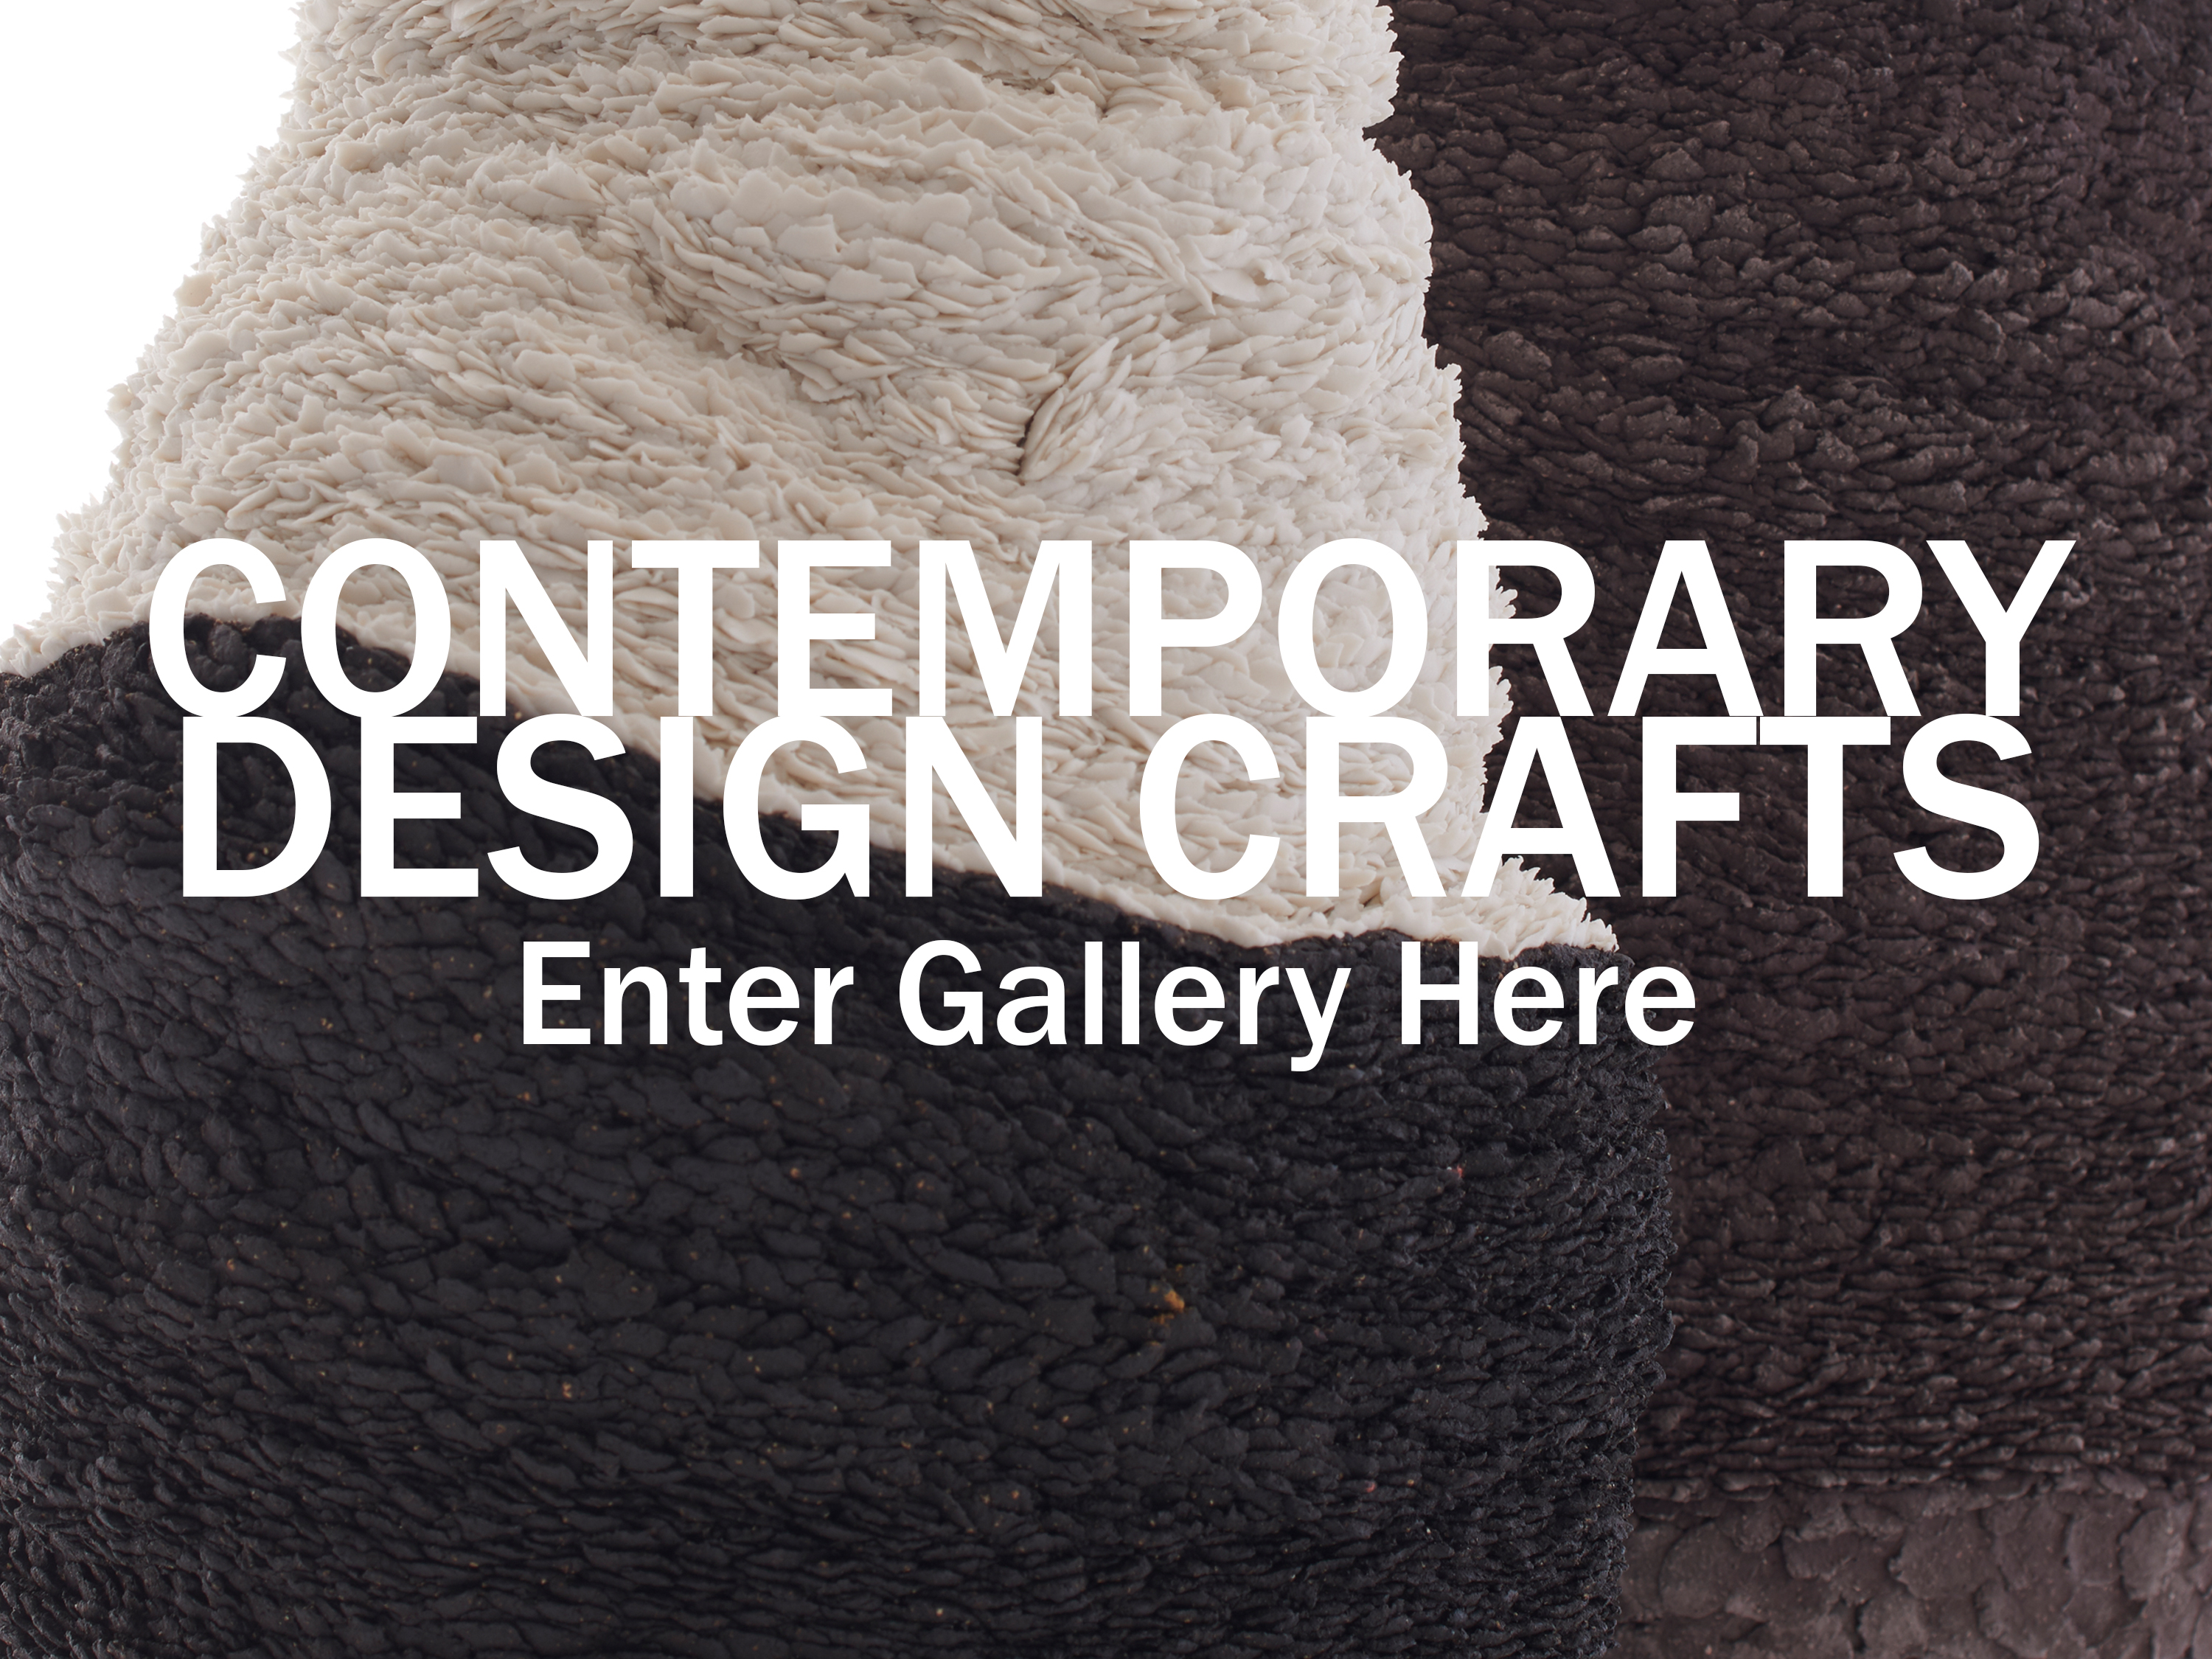 Enter Contemporary Design Crafts Gallery Here